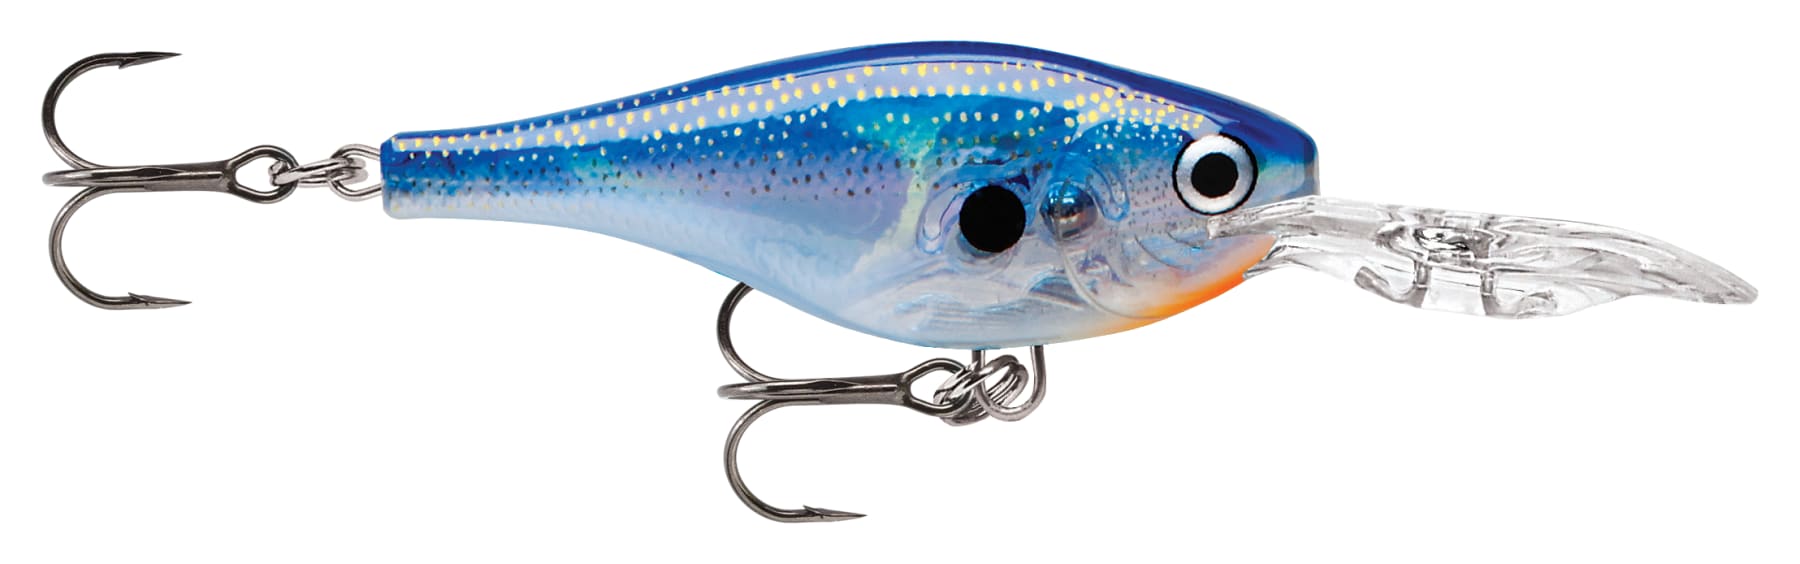 Rapala Jointed Lure - 2.75-in - Blue